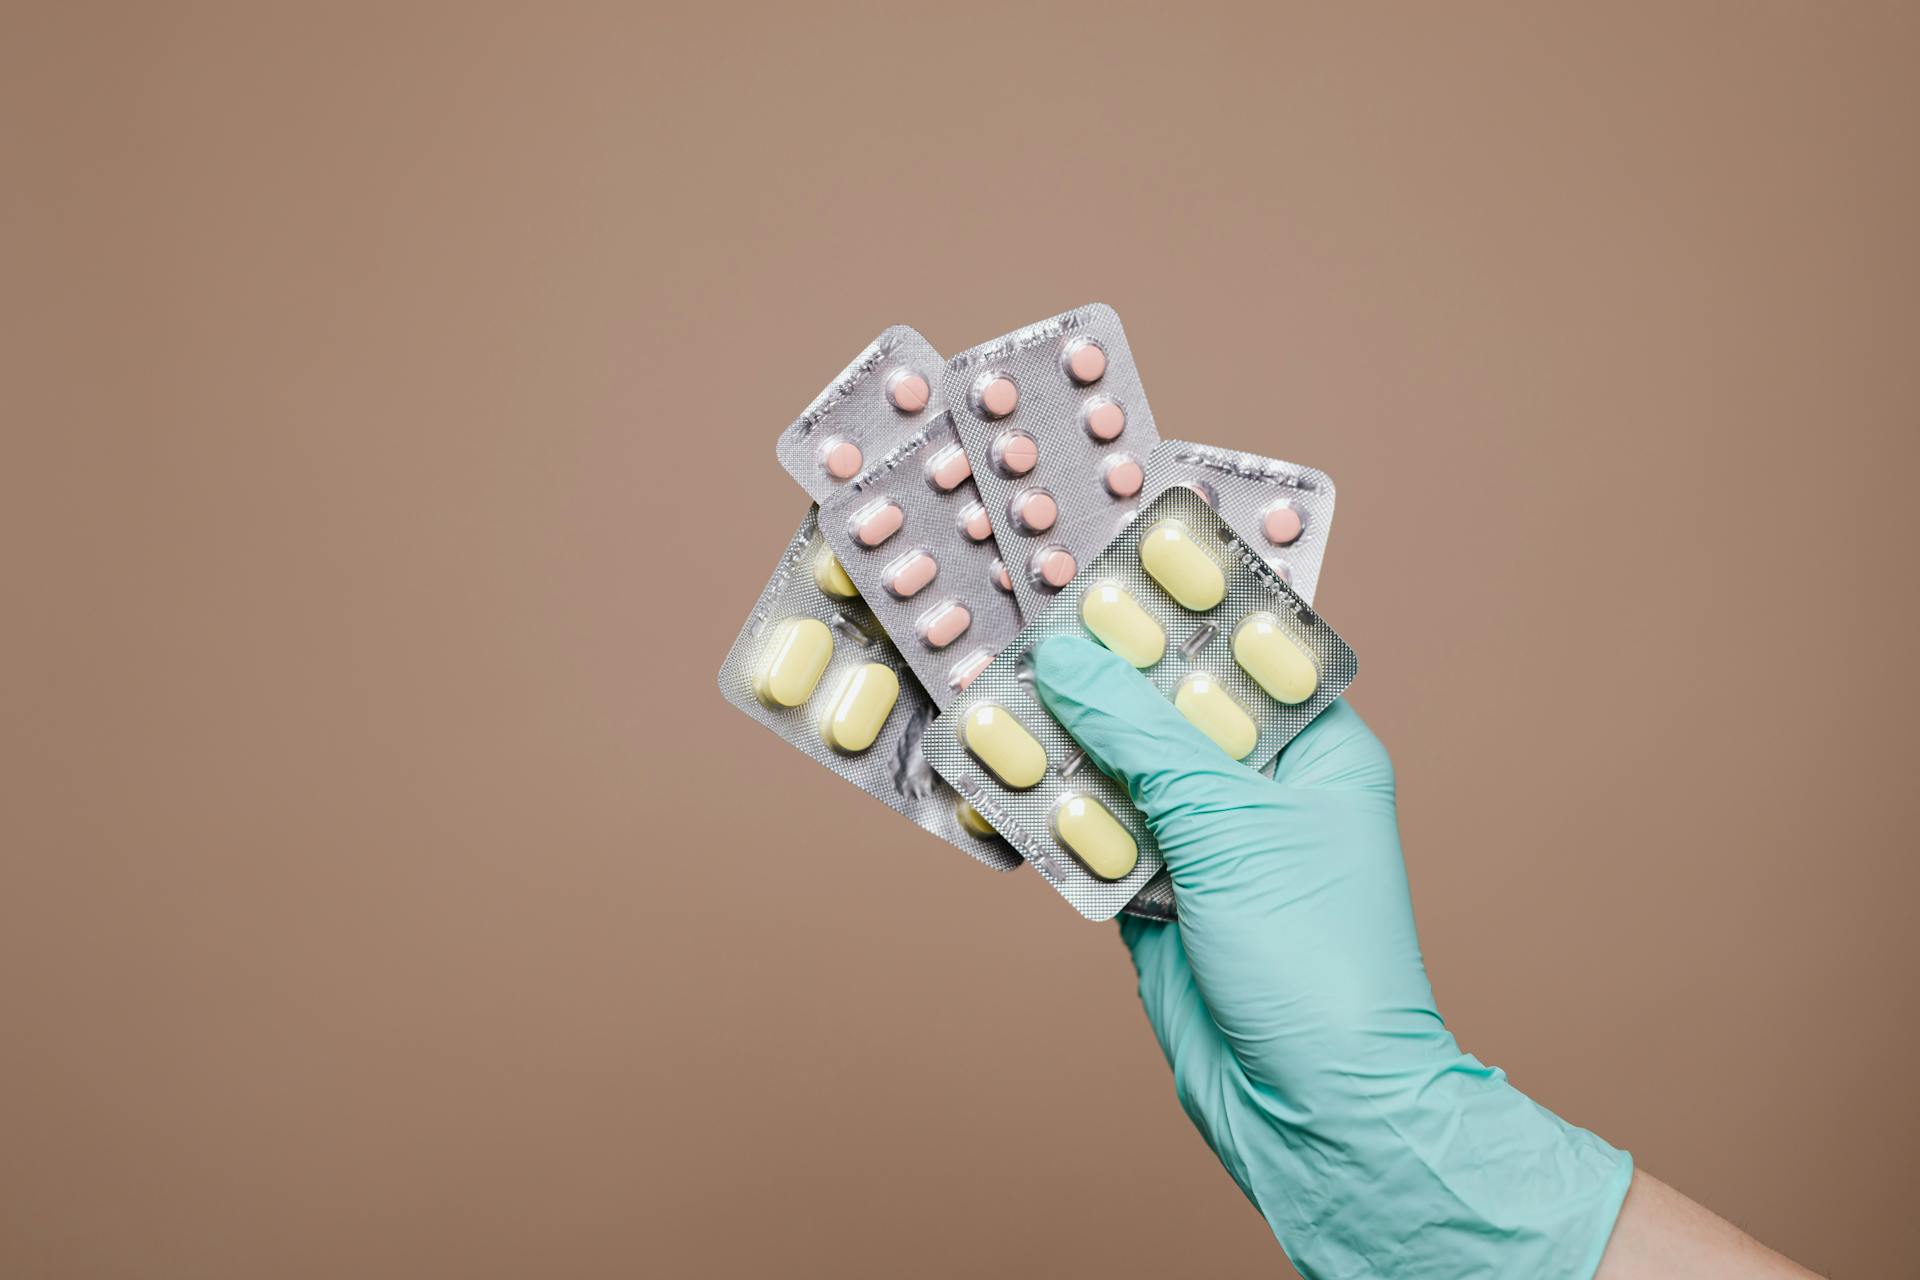 Person holding medication | Source: Pexels